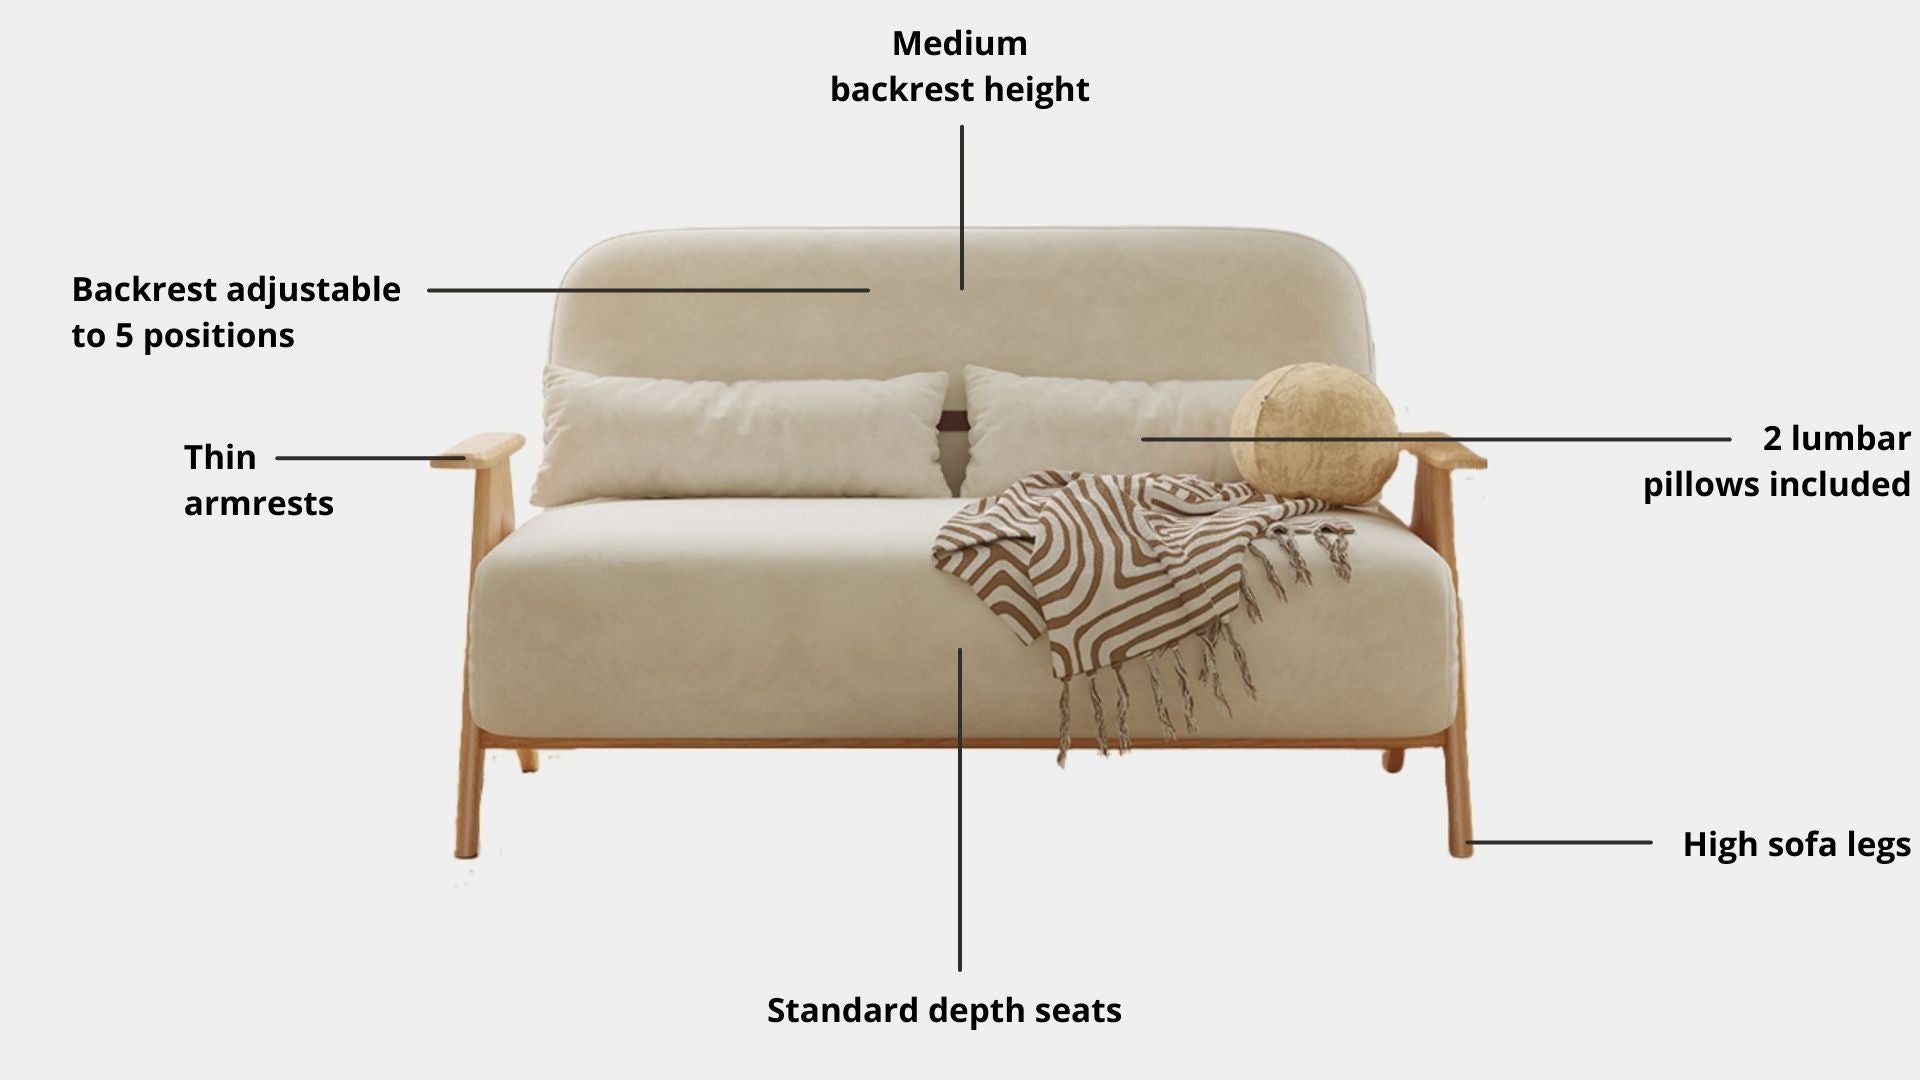 Key features such as armrest thickness, cushion height, seat depth and sofa leg height for Corona Fabric Sofa Bed